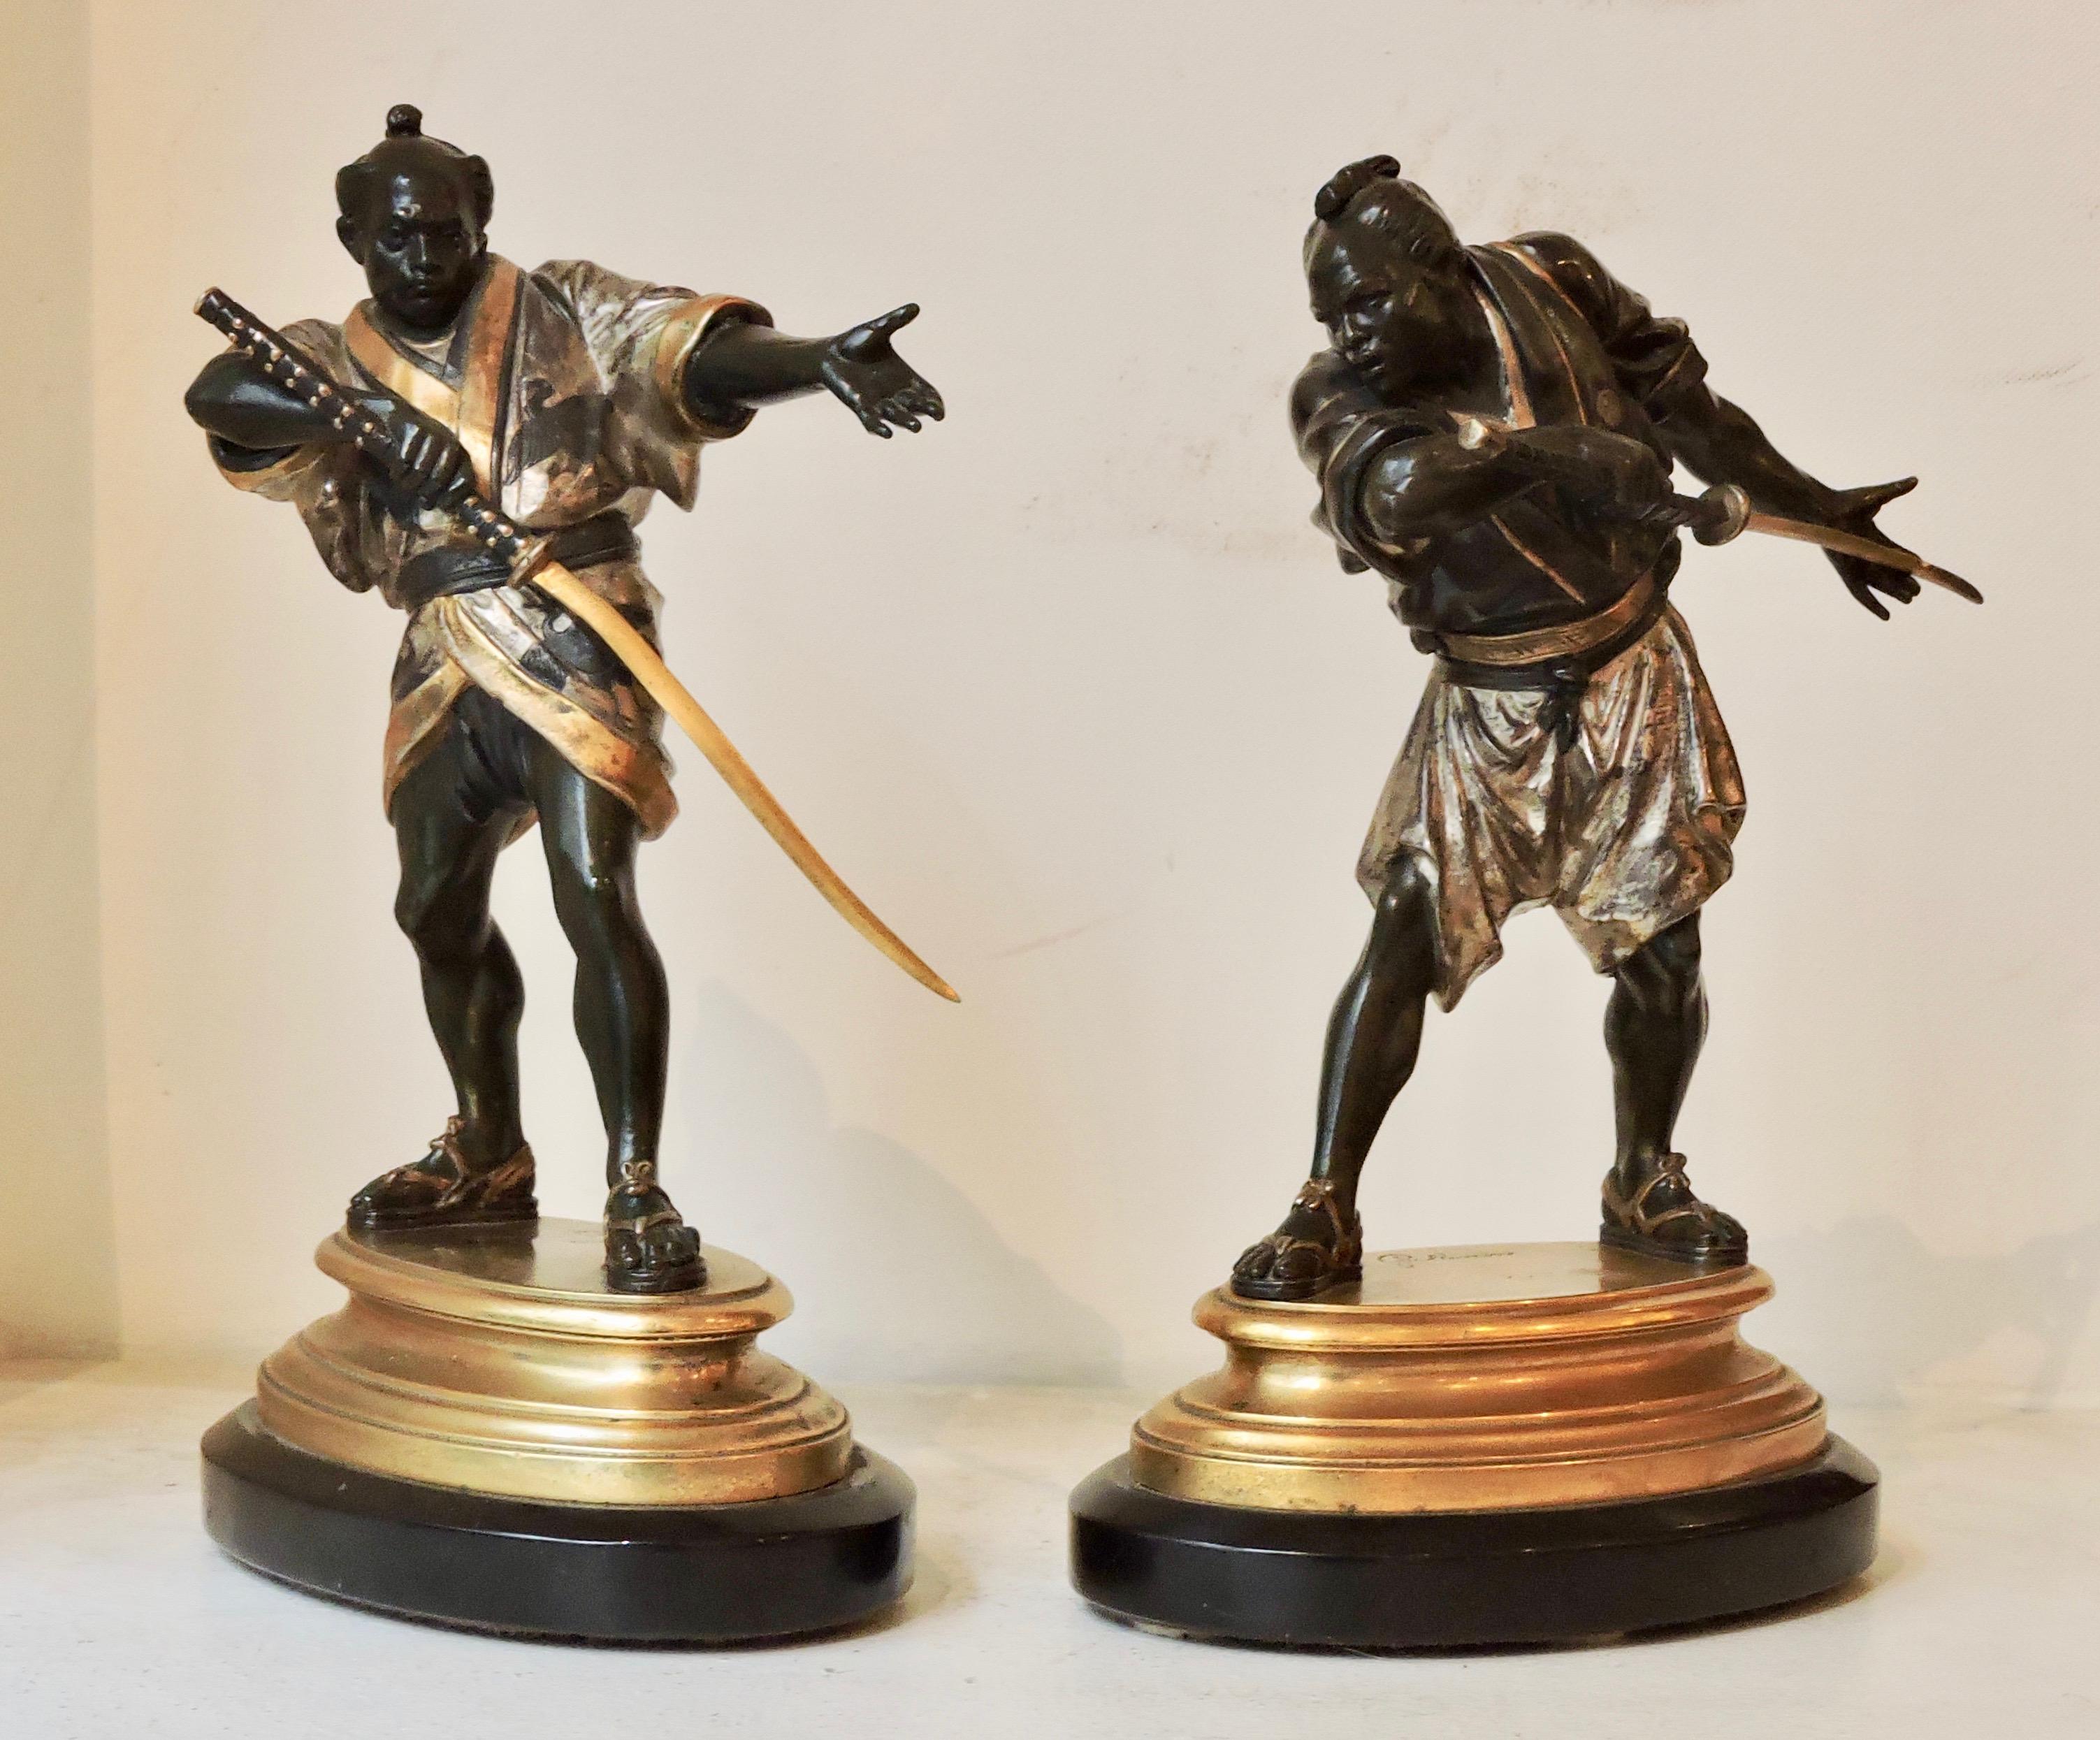 A 19th century very fine pair of bronze Samuraïs Warriors by Emile-Coriolan Hippolyte Guillemin ( 1841-1907)
Very famous orientalist and Japonisme sculptor ( Louvre Museum, Orsay Museum, Paris, France)
Brown, silvered and gilded patinas on a black